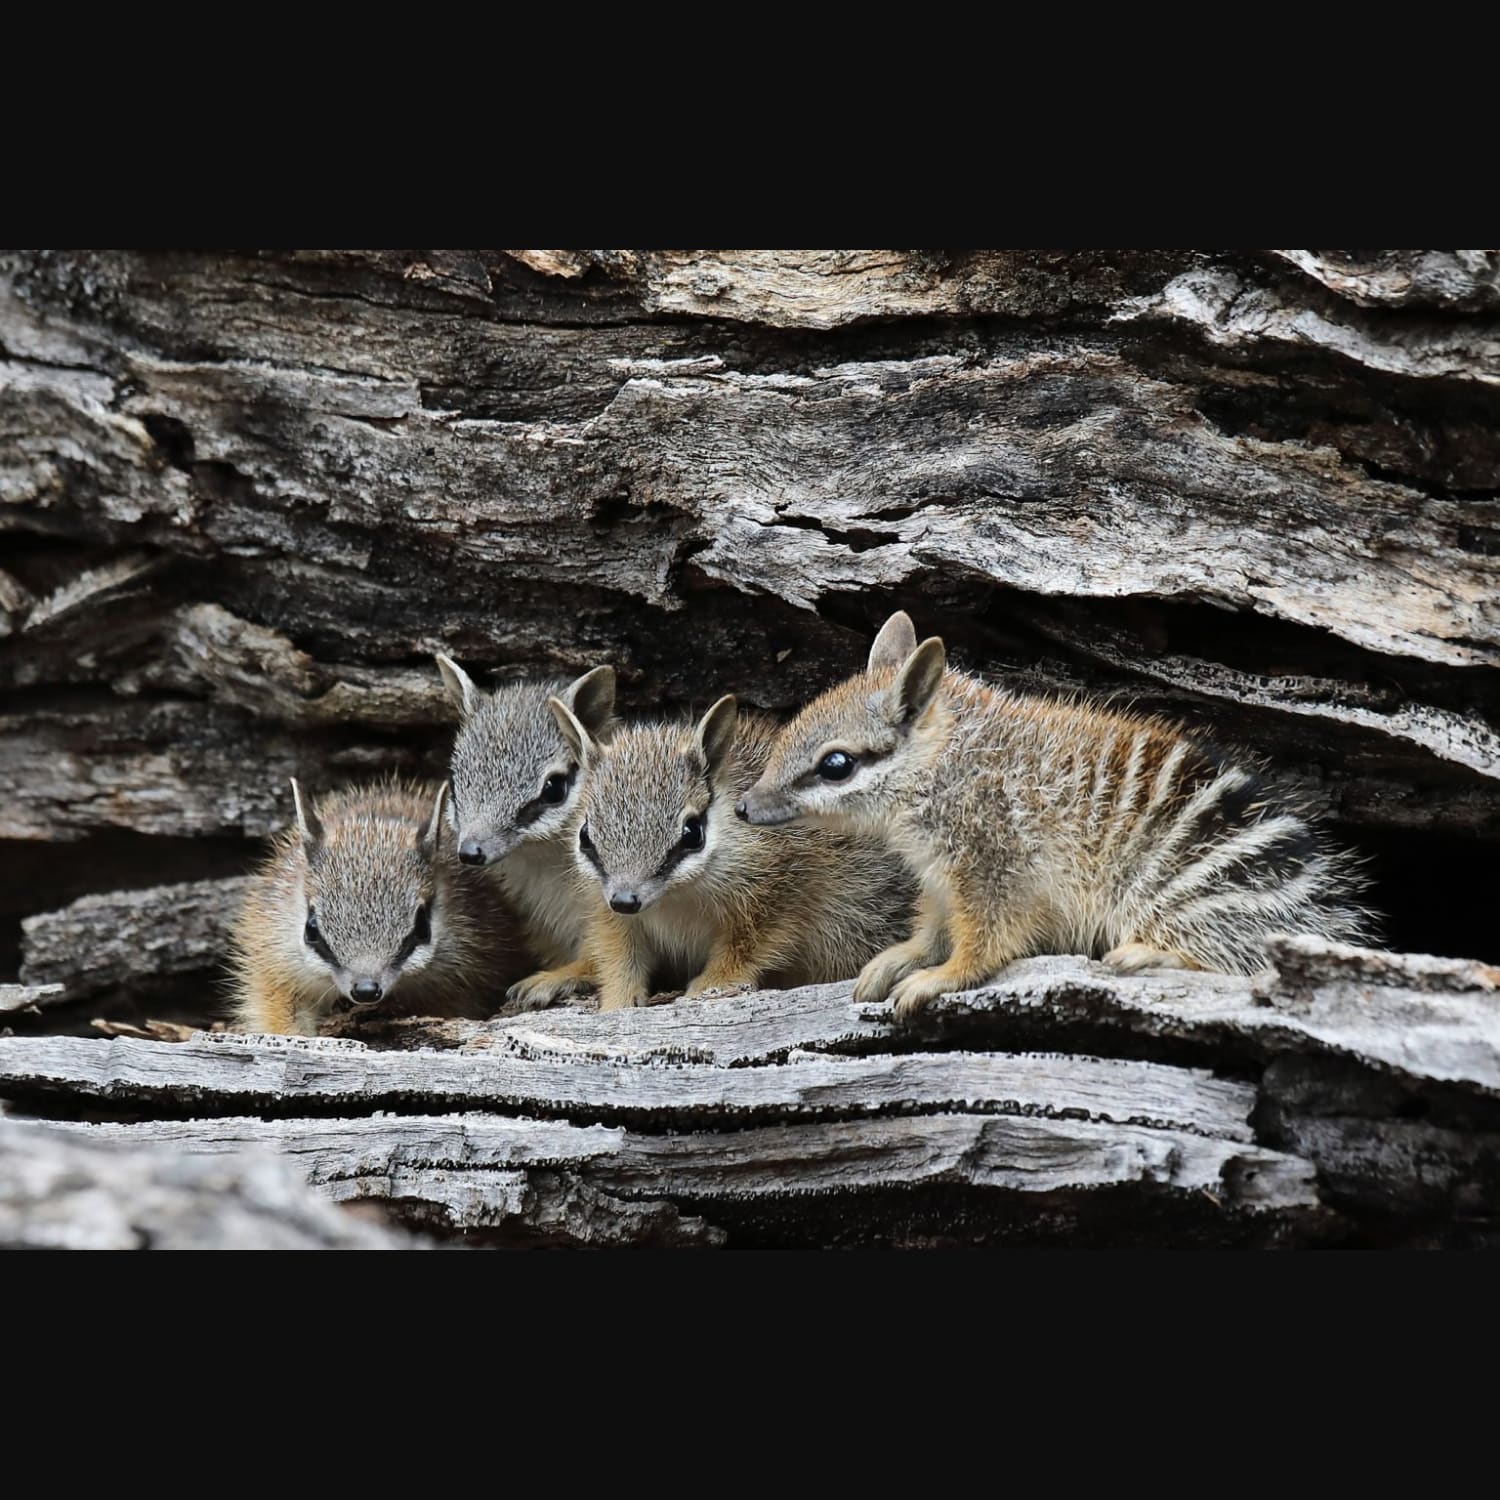 The Numbat aka the banded anteater, is a small pouchless insect-eating marsupial native to Australia. It grows to about 29.5-50 cm including its bushy tail. Numbat has a long sticky tongue that allows it to pick up termites, which is its primary diet. An adult numbat needs up to 20K termites daily.